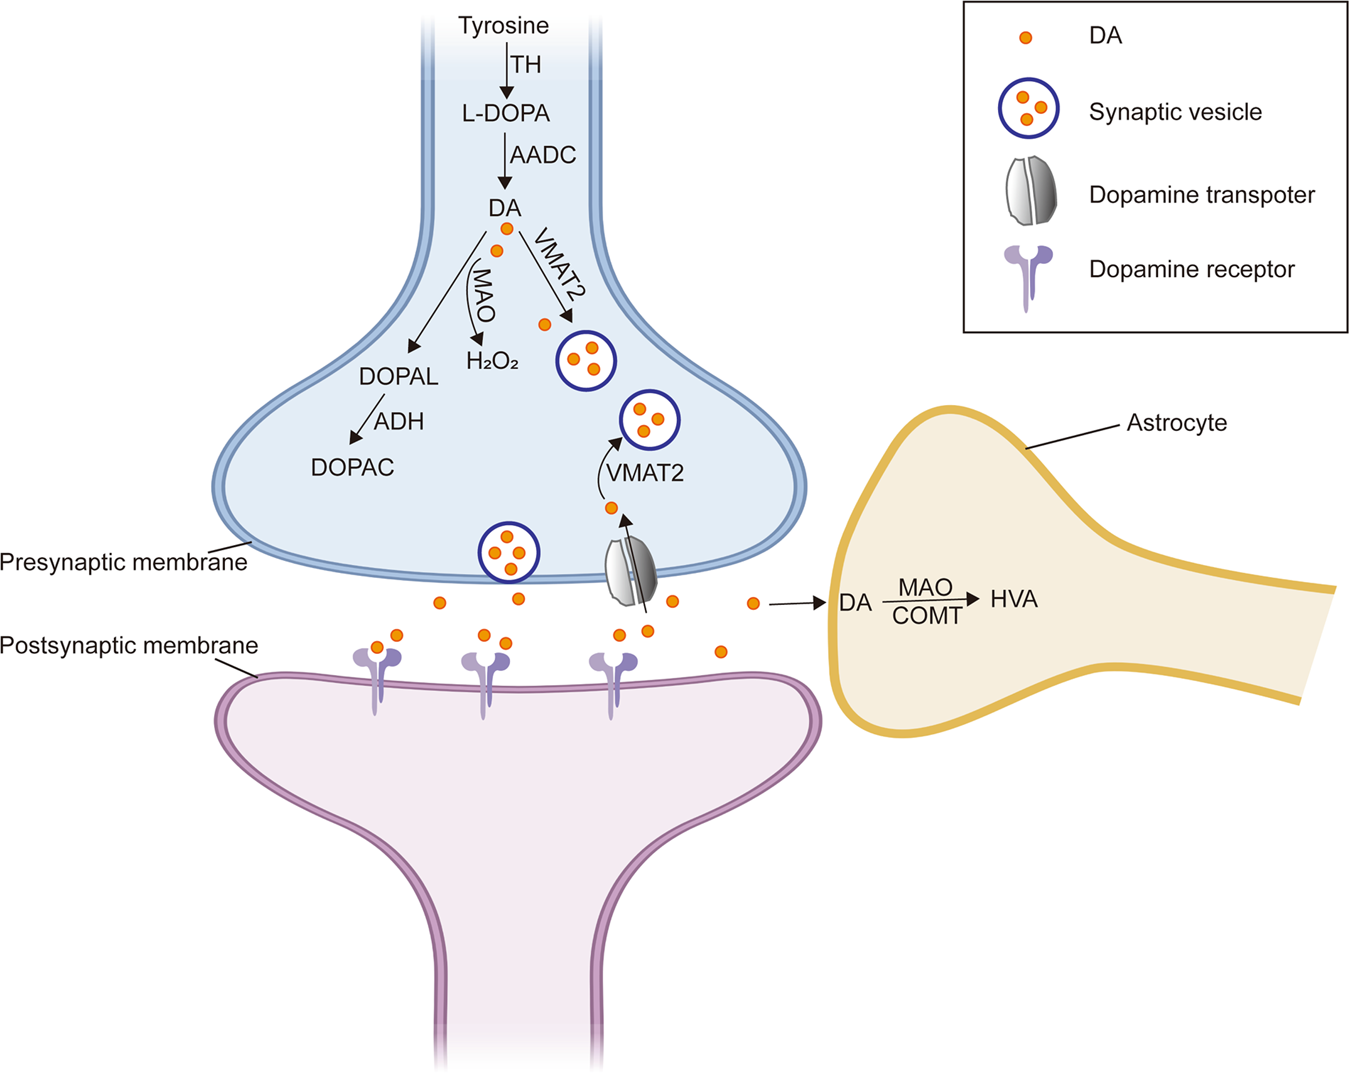 The interplay of dopamine metabolism abnormalities and